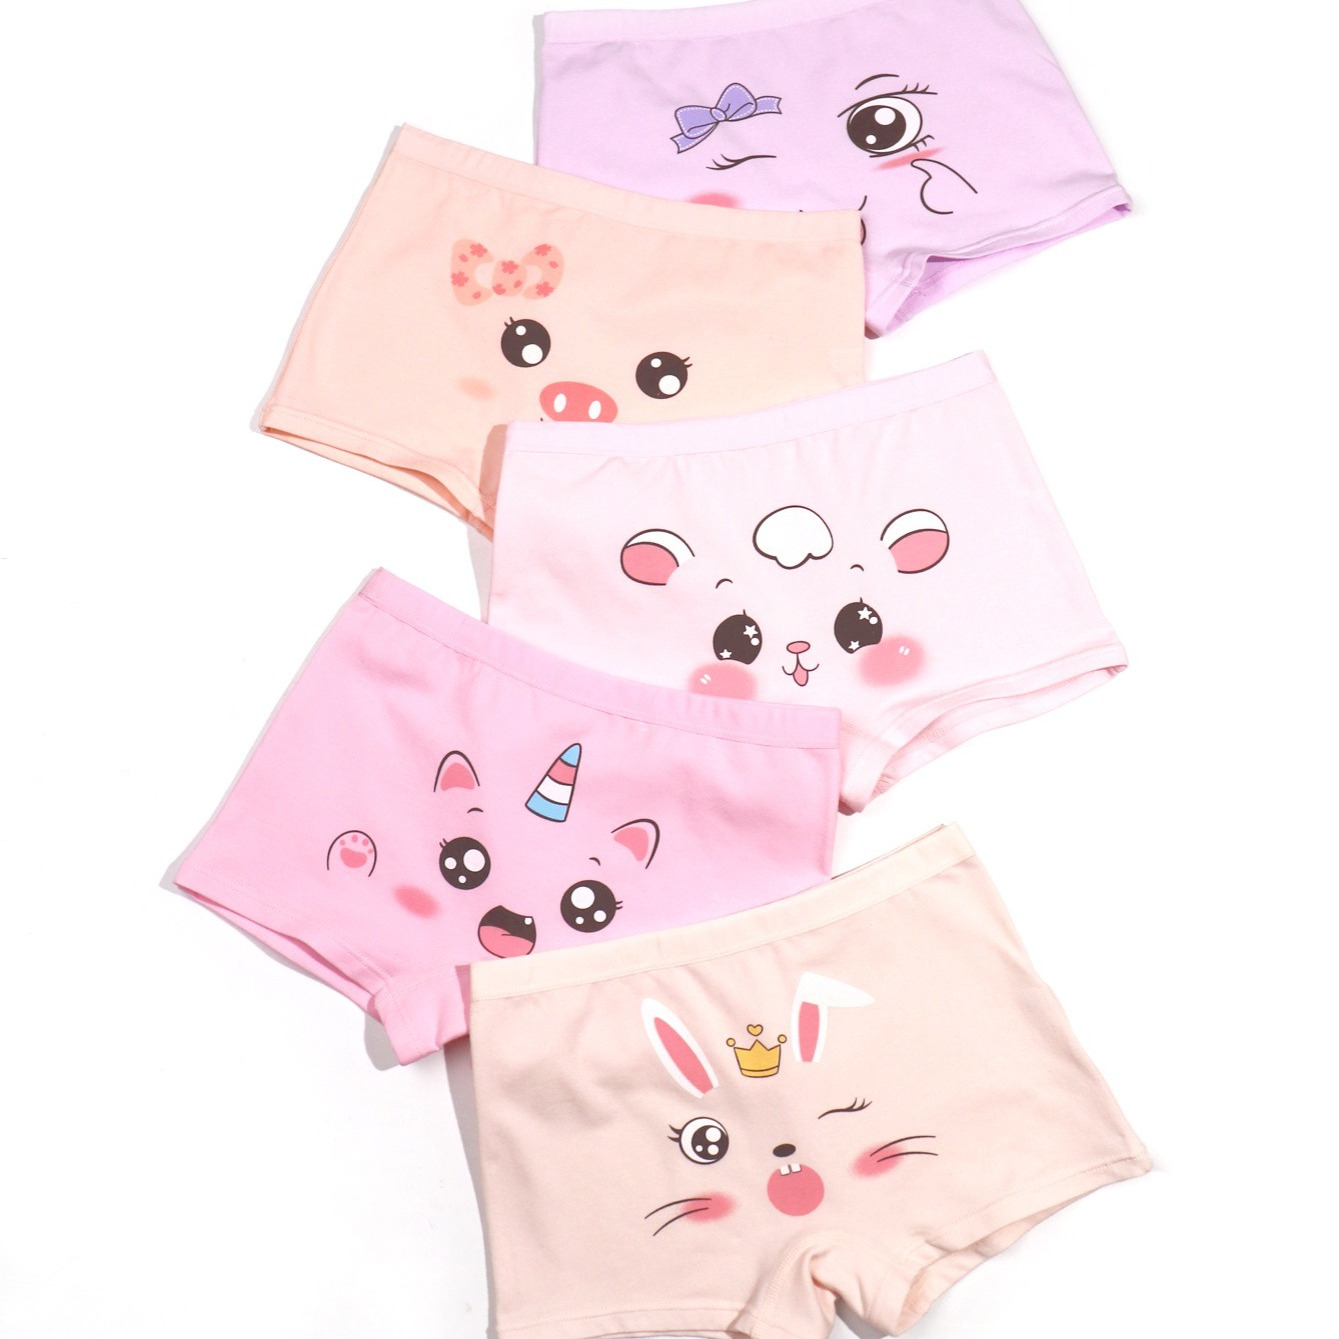 5 Pcs/Lot Cotton Girl Underwear Pretty Cartoon Panties For Girls 1-14Y  Breathable Kids Boxers Briefs Elastic Children Underpants Color: 2-20GS030,  Kid Size: S (4-5 Years)